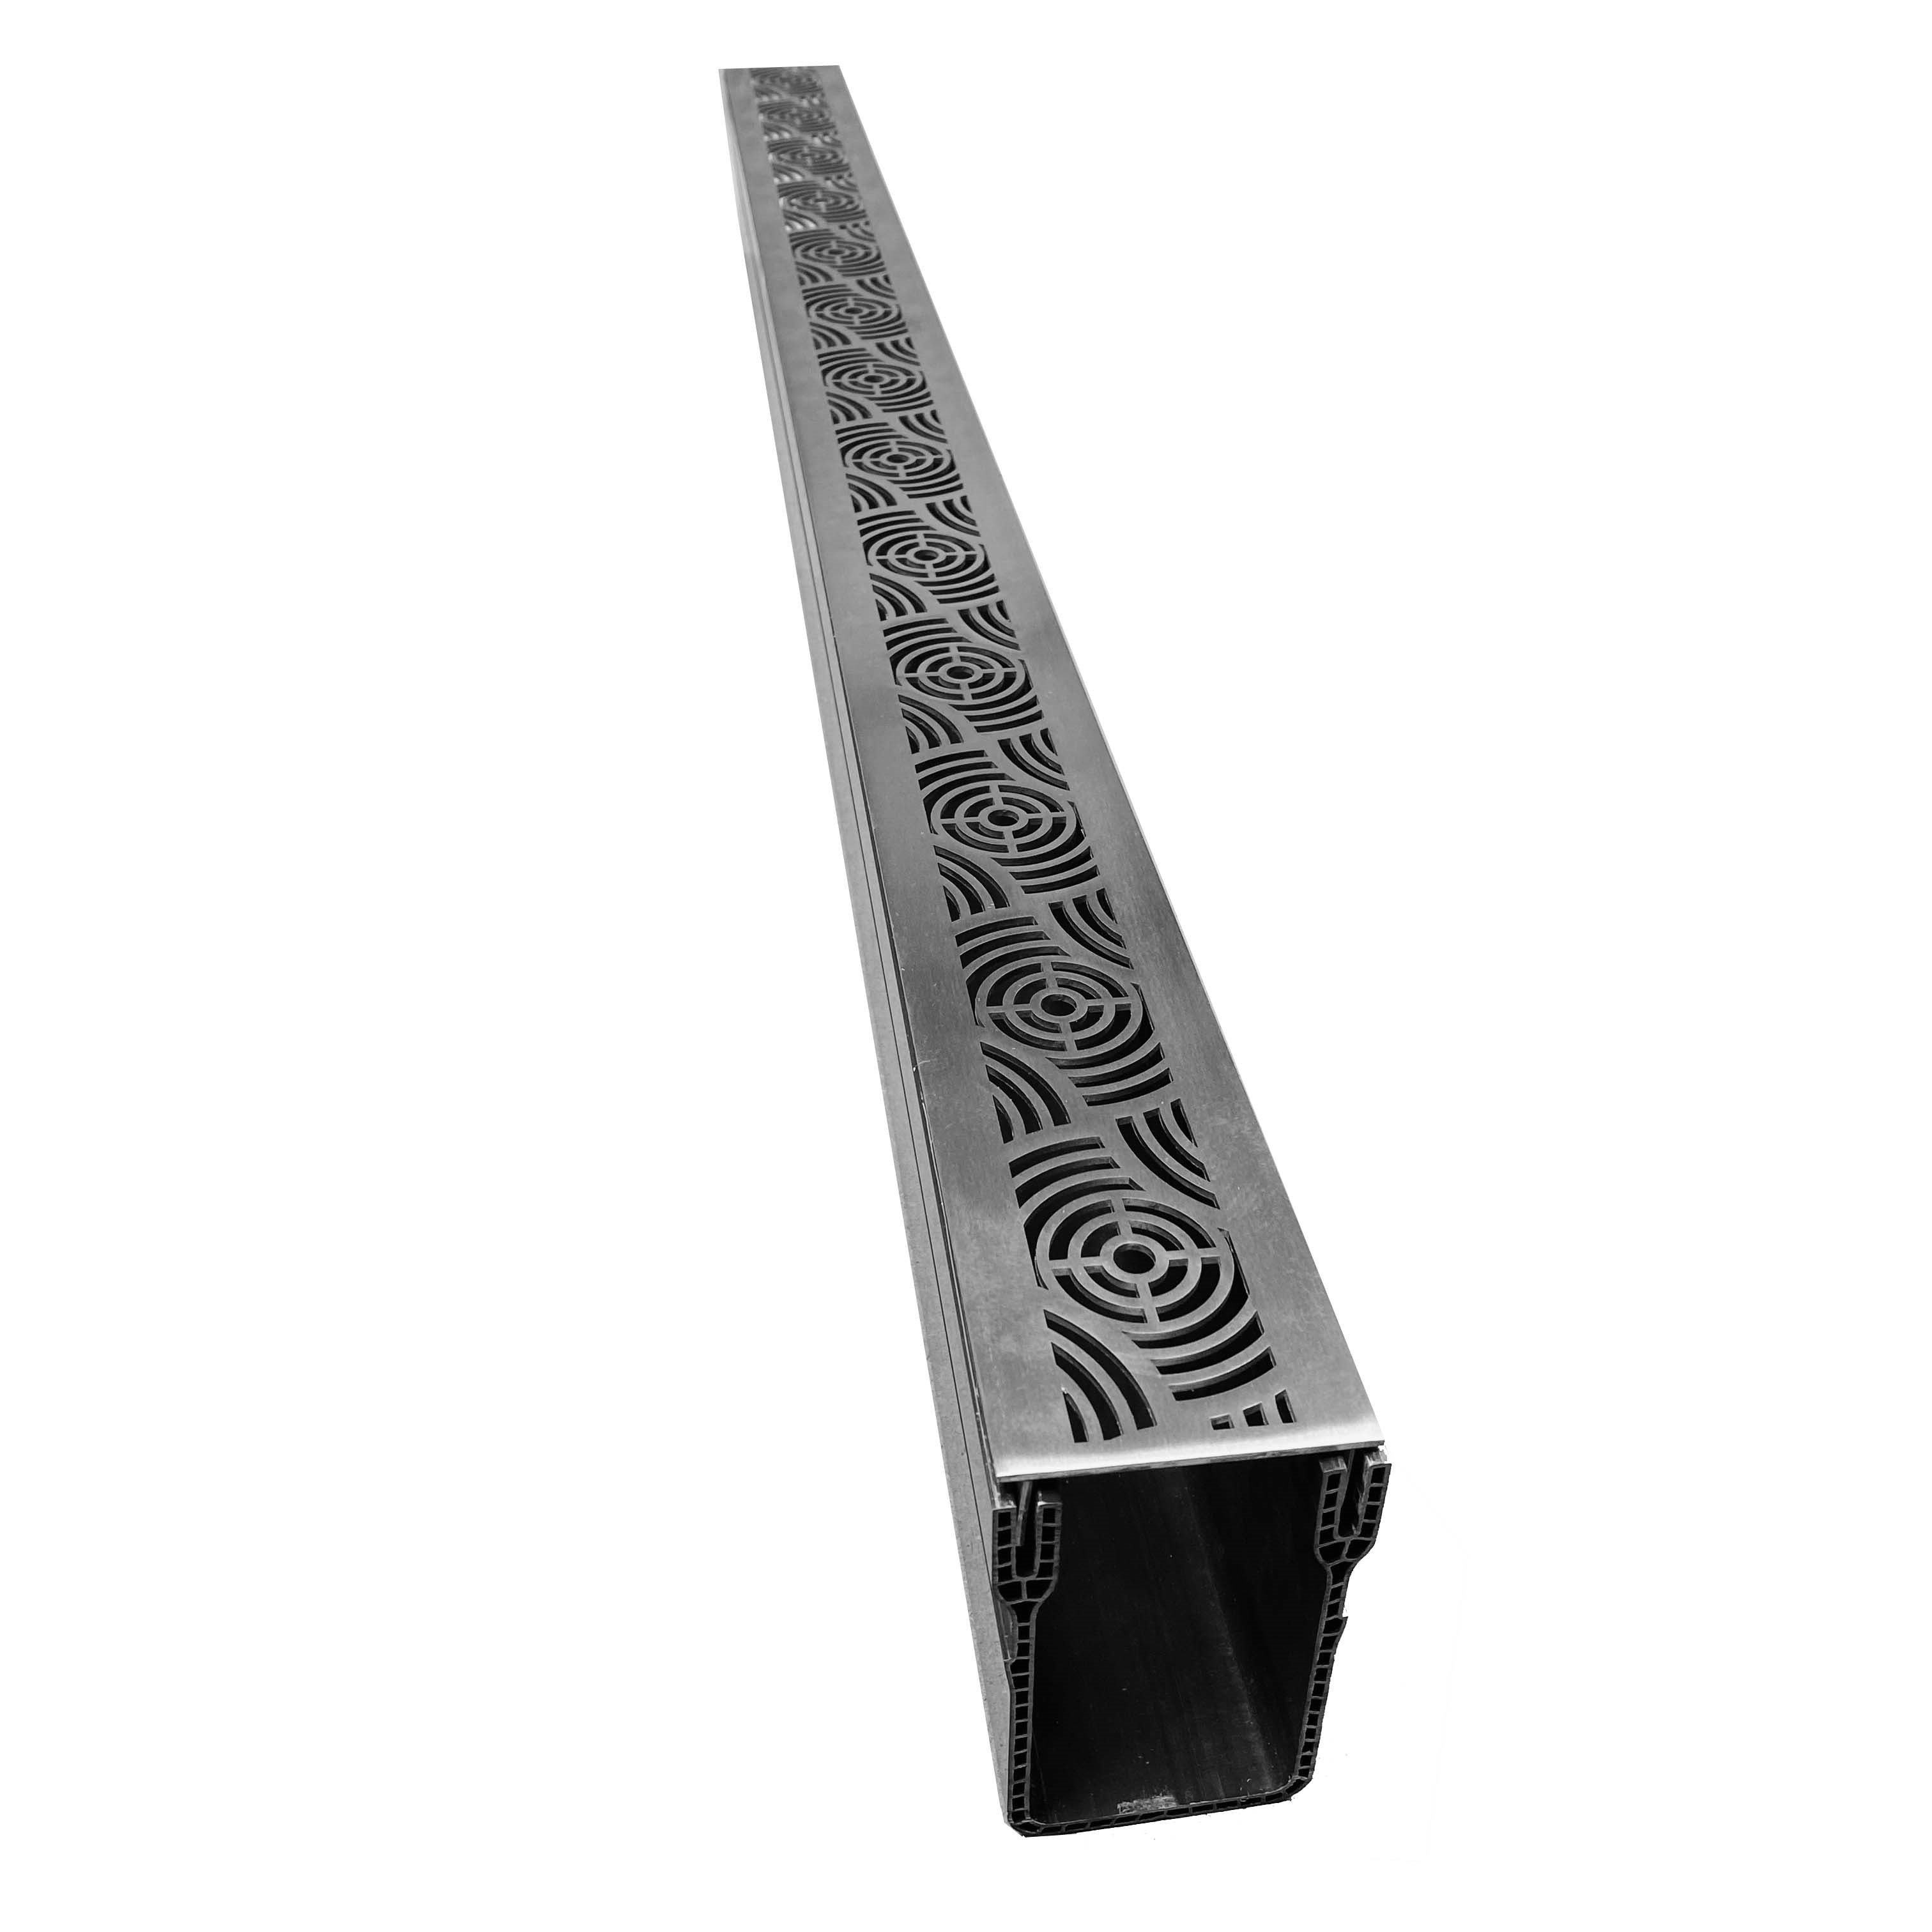 1m Threshold Slim Drain with Waves 316 Stainless Steel Grating (65 x 100mm Deep)